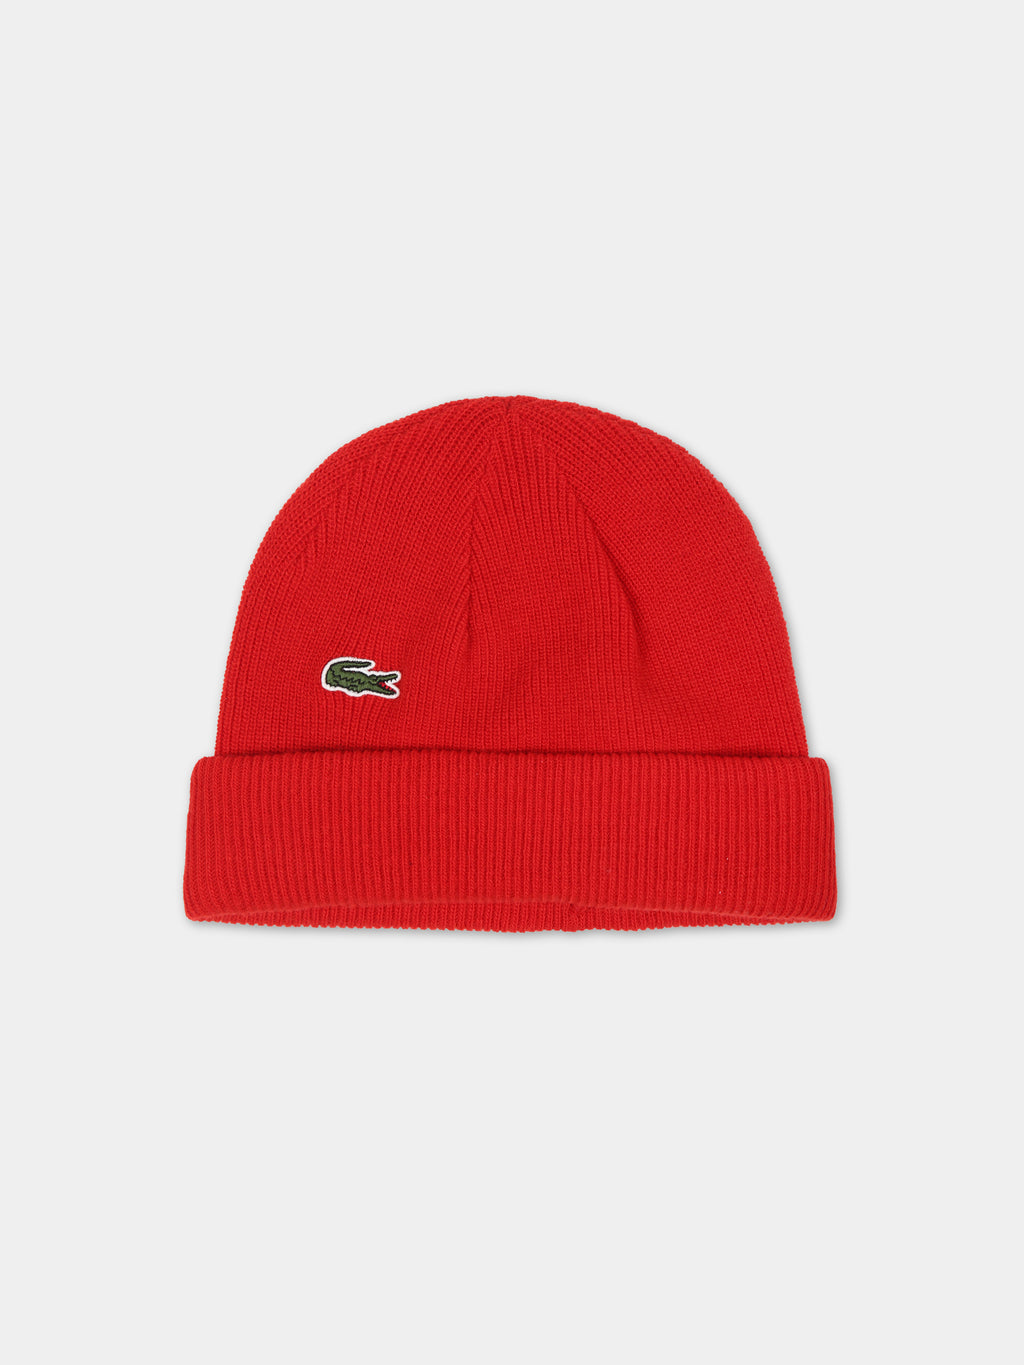 Red hat for boy with patch of the iconic logo